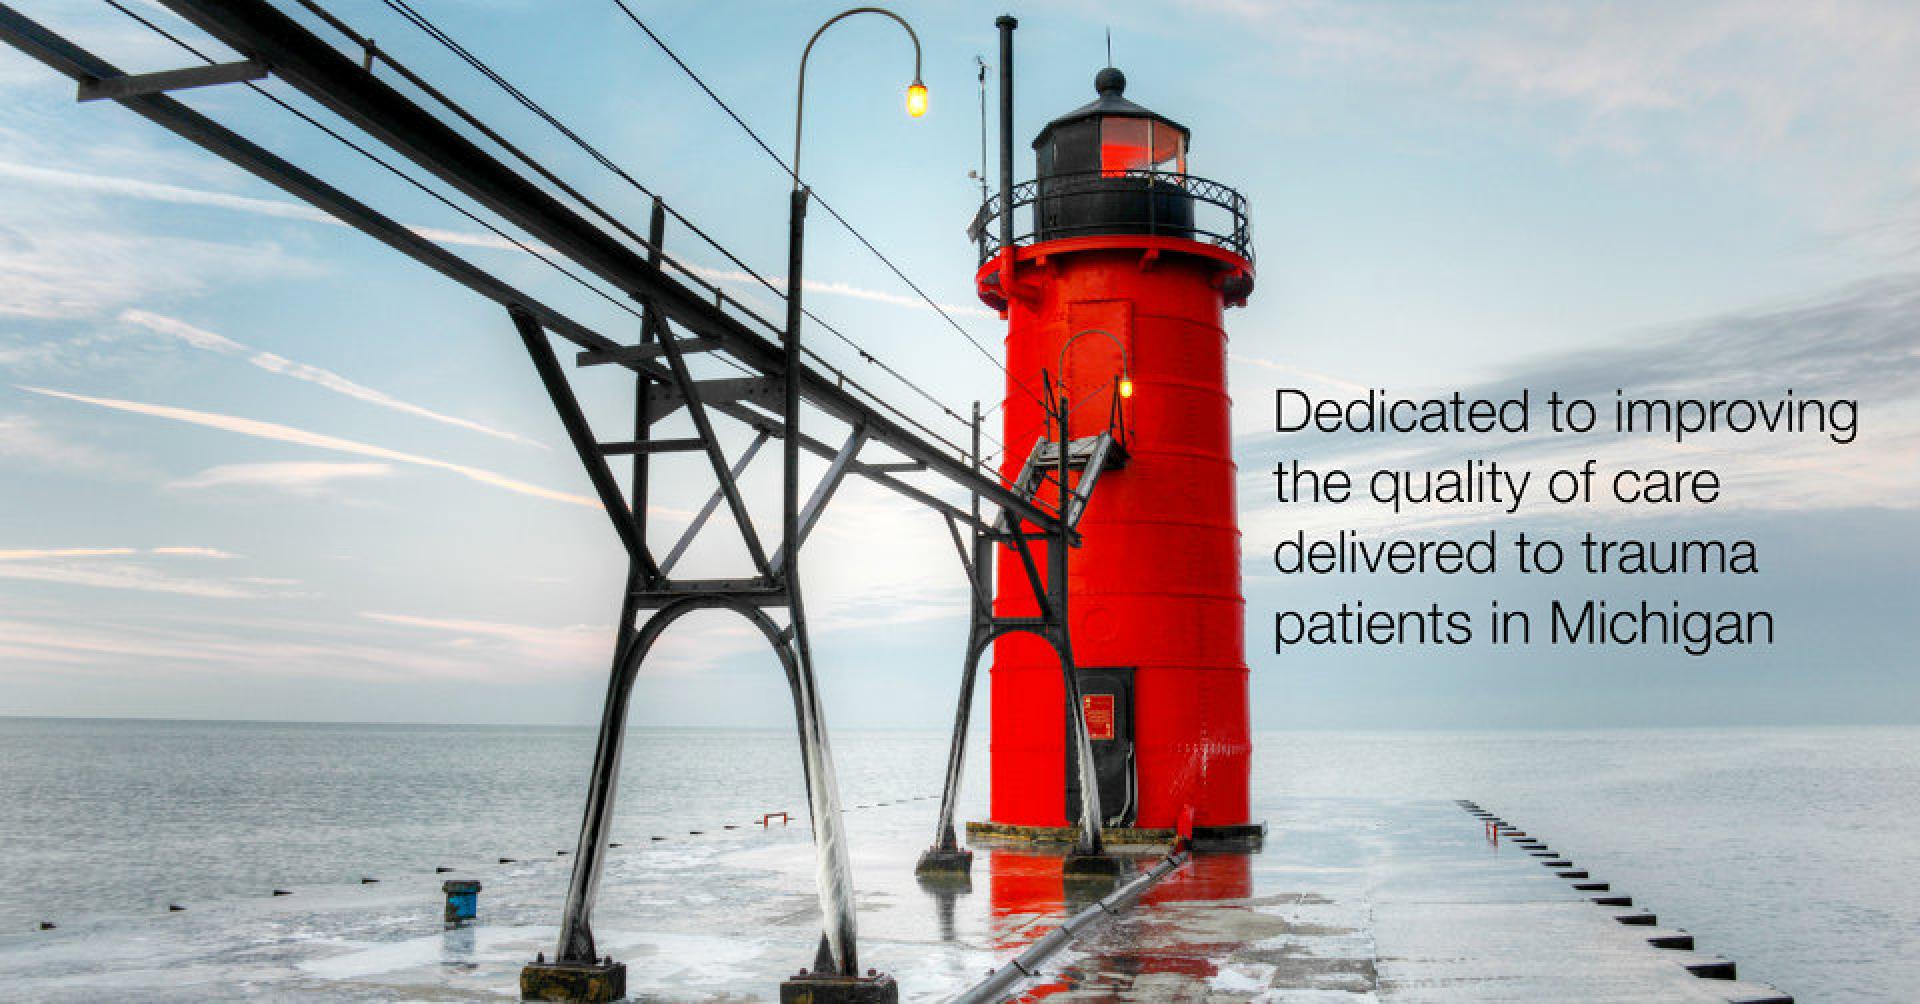 MTQIP: dedicated to improving the quality of care delivered to trauma patients in Michigan